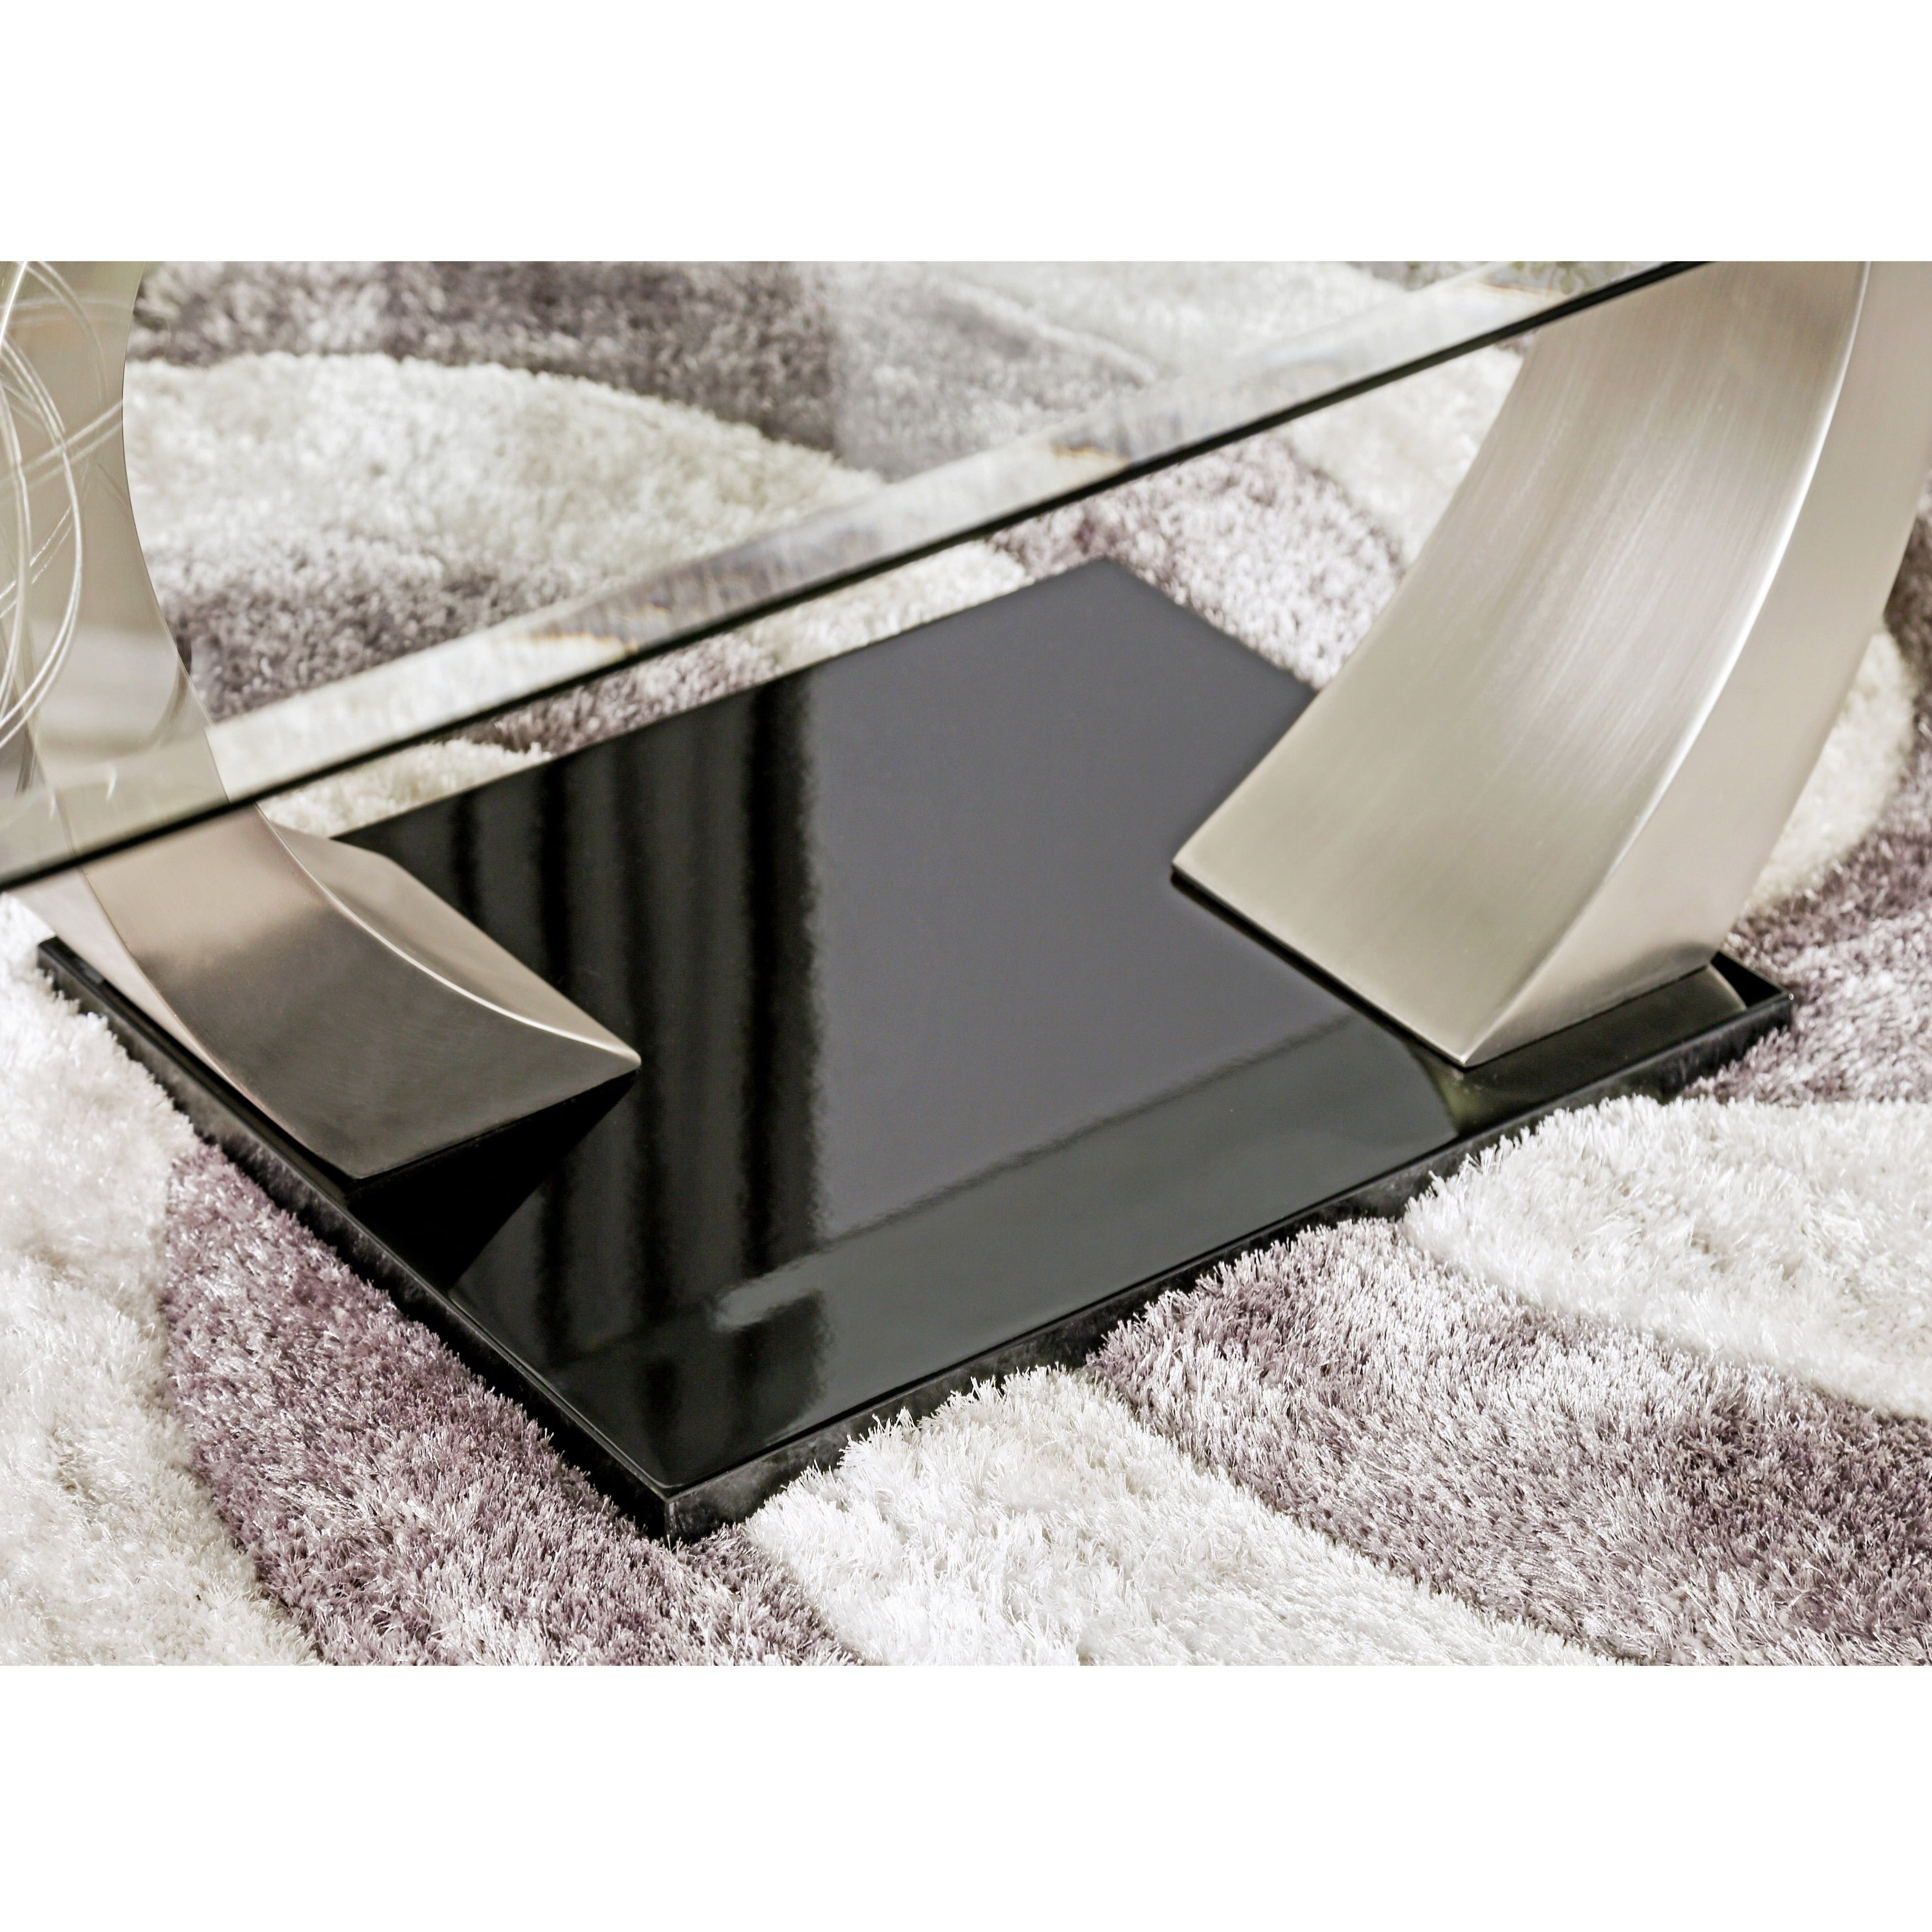 Favorite Carmella Satin Plated Coffee Tables Regarding Carmella Satin Plated Coffee Tablefoa (View 4 of 20)